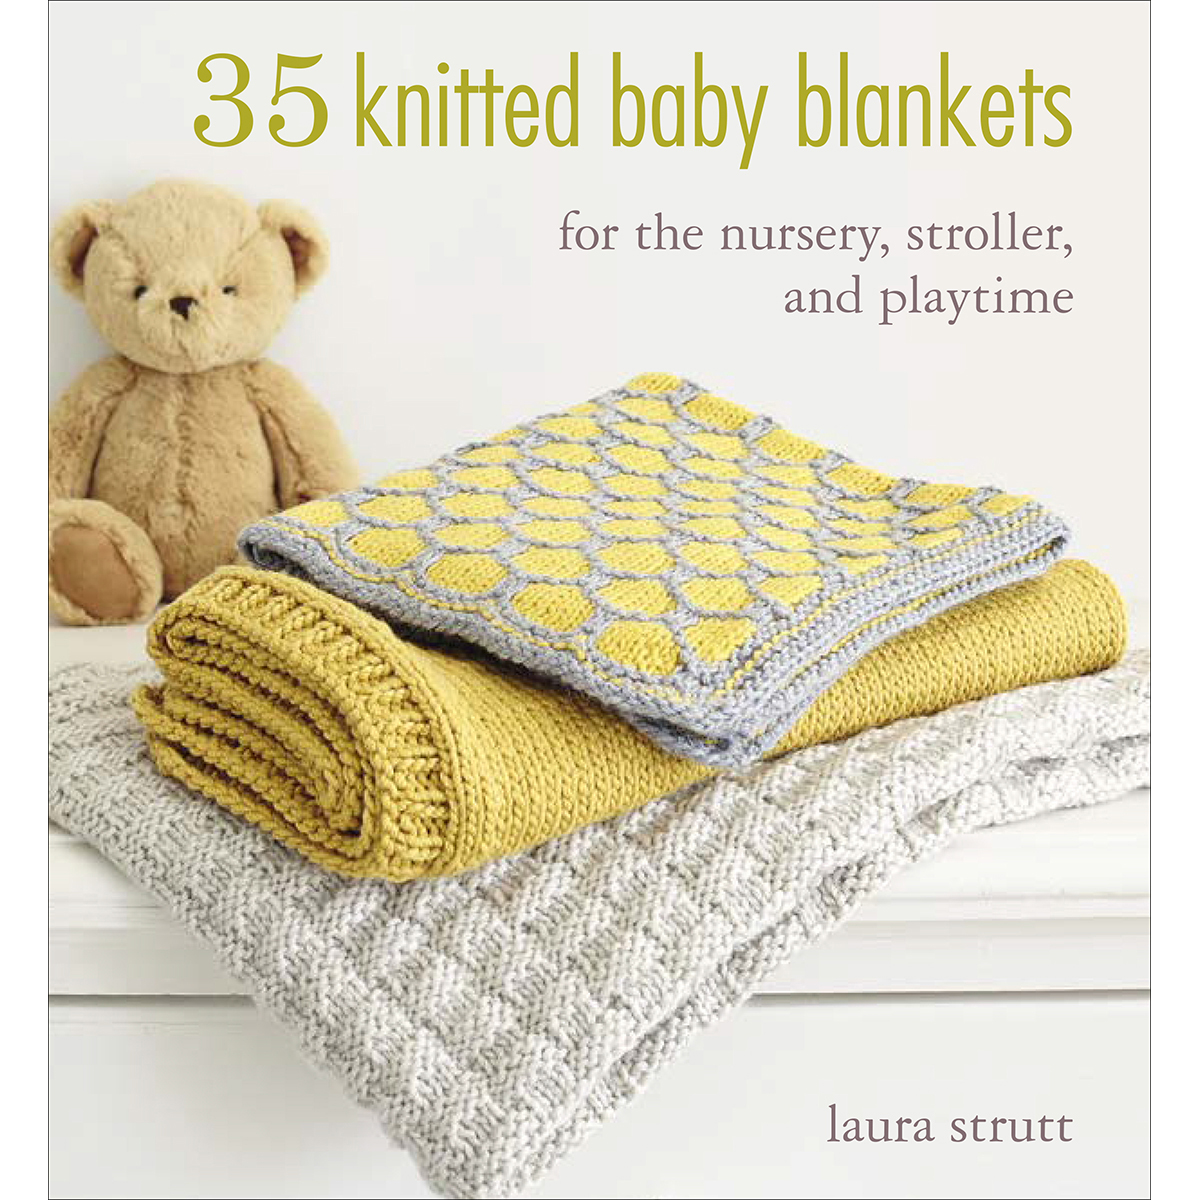 <p>From the first car journey to an outing in a stroller a knitted blanket will accompany baby wherever they go. Laura Strut has designed a teddy bear travel blanket that cleverly folds away into a pillow and a hooded wrap for keeping cozy in a sling. For the nursery there is a soft crib cover and a dungaree-style sleeping sack in breathable merino yarn - perfect for a peaceful night&#39;s rest. For playtime there&#39;s a cotton-backed blanket that can double up as a rug to take out and about and a tiny comforter blanket guaranteed to become baby&#39;s closest companion.</p>